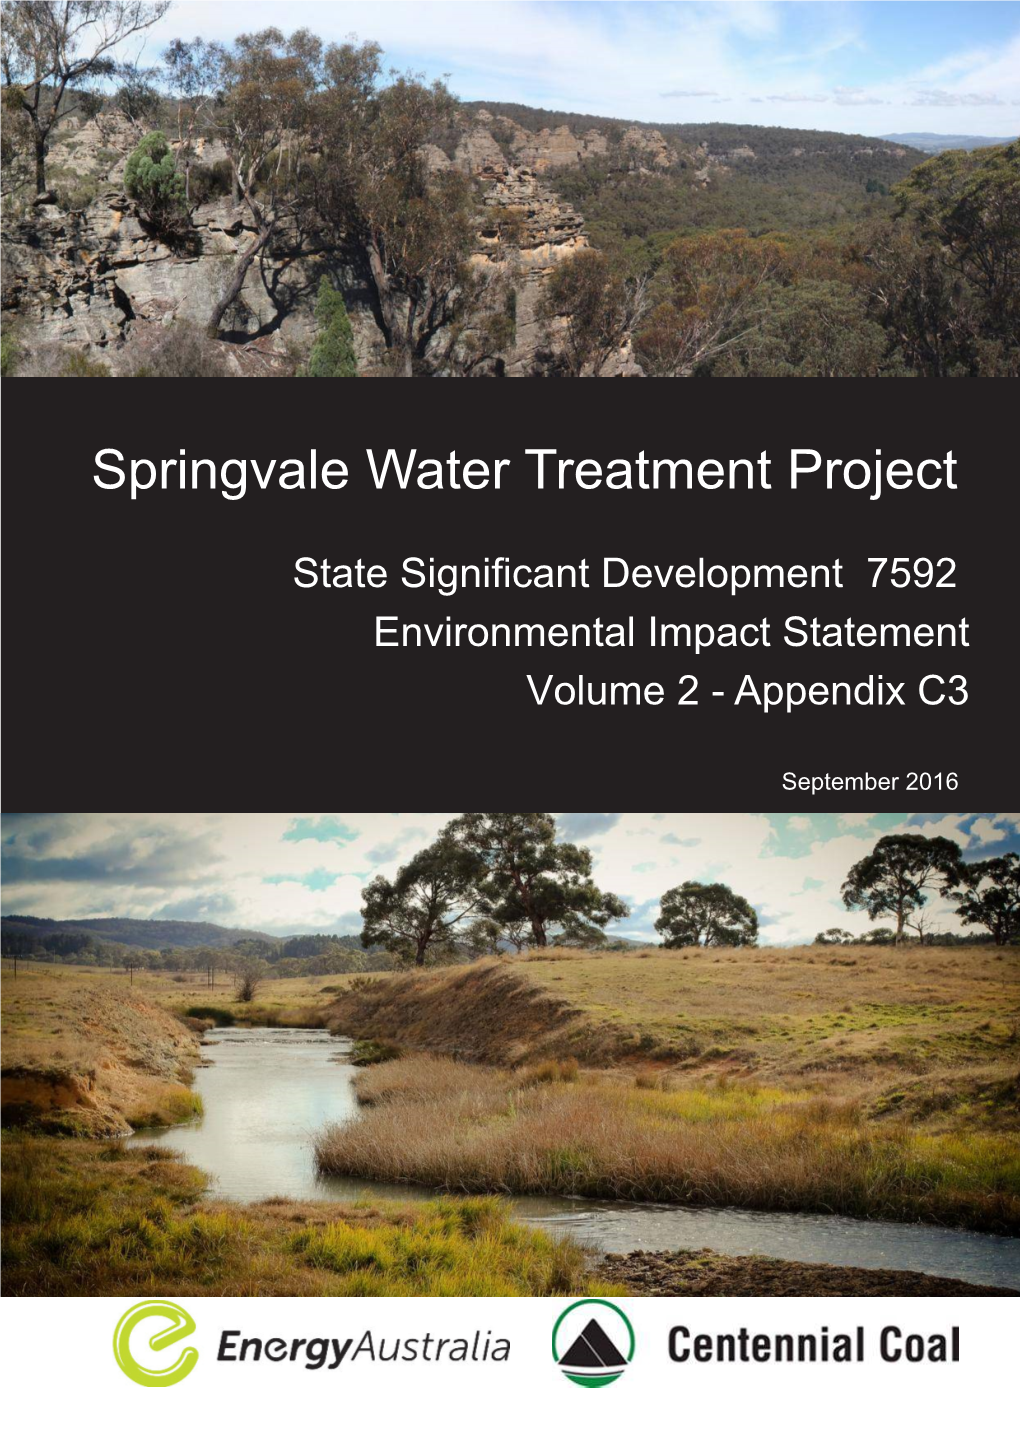 Springvale Water Treatment Project